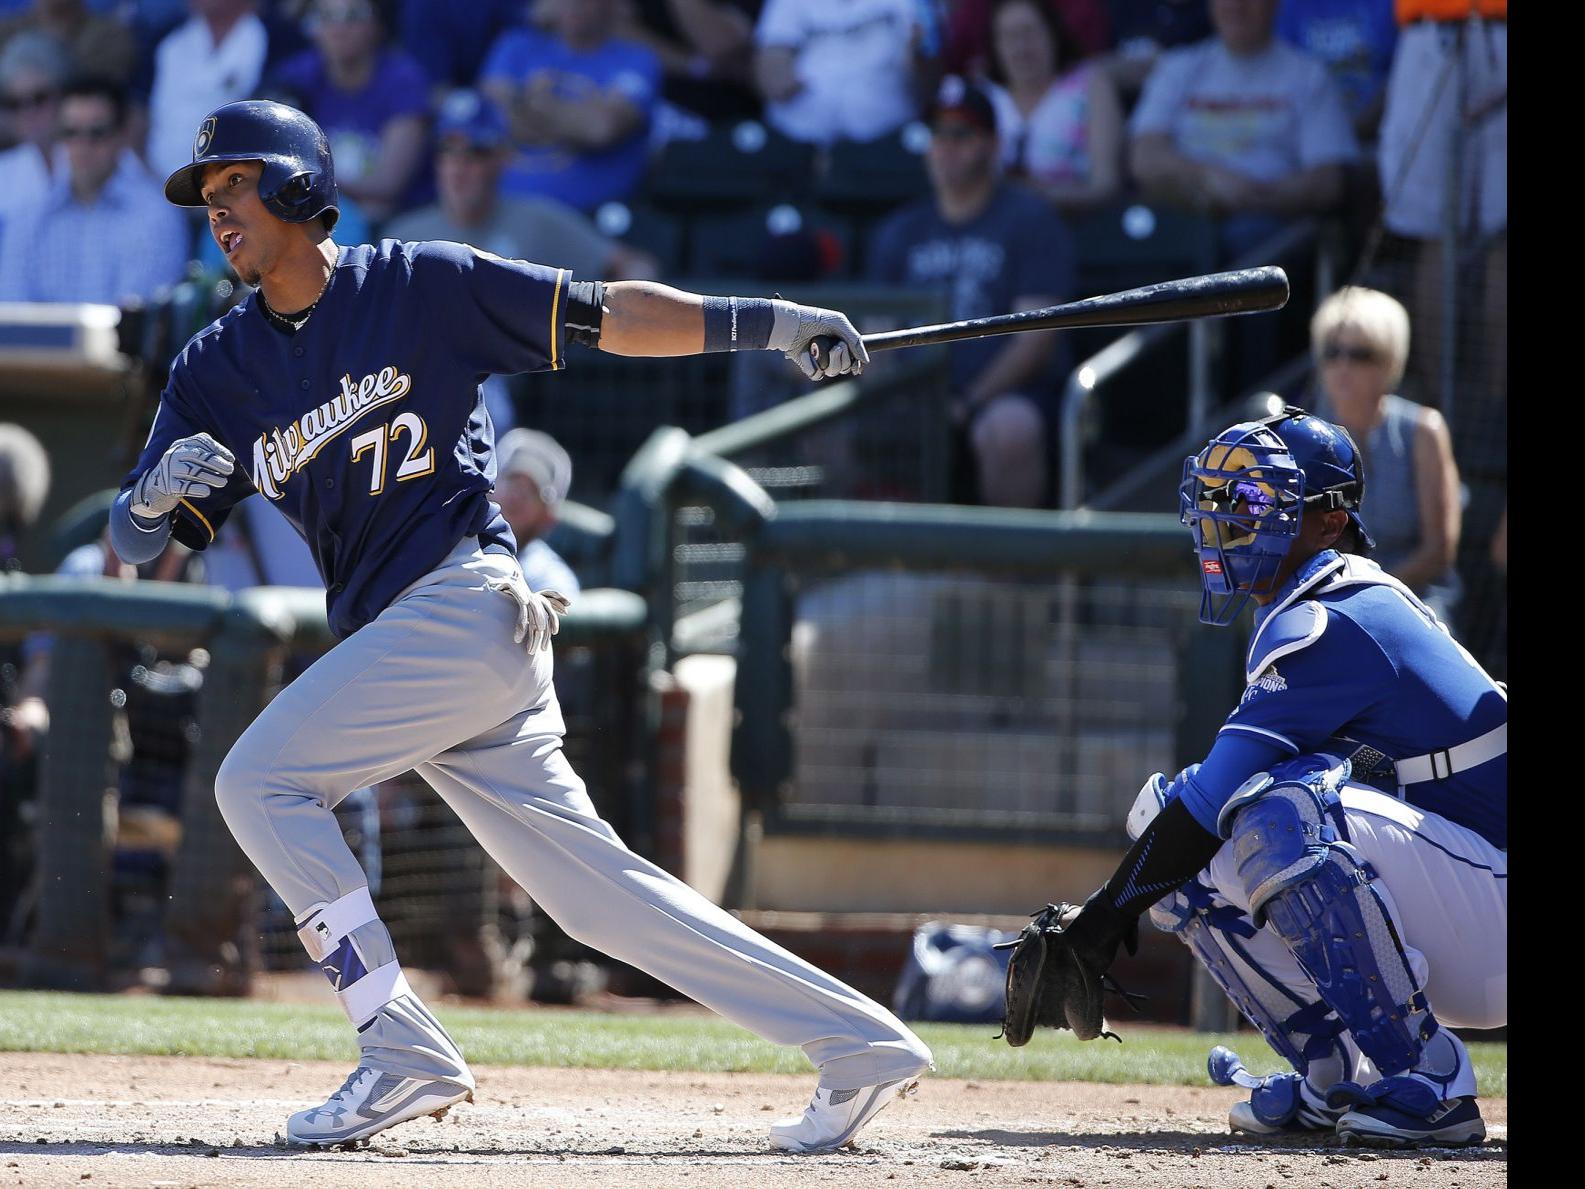 Brewers' top prospect Orlando Arcia is a rare talent opening the